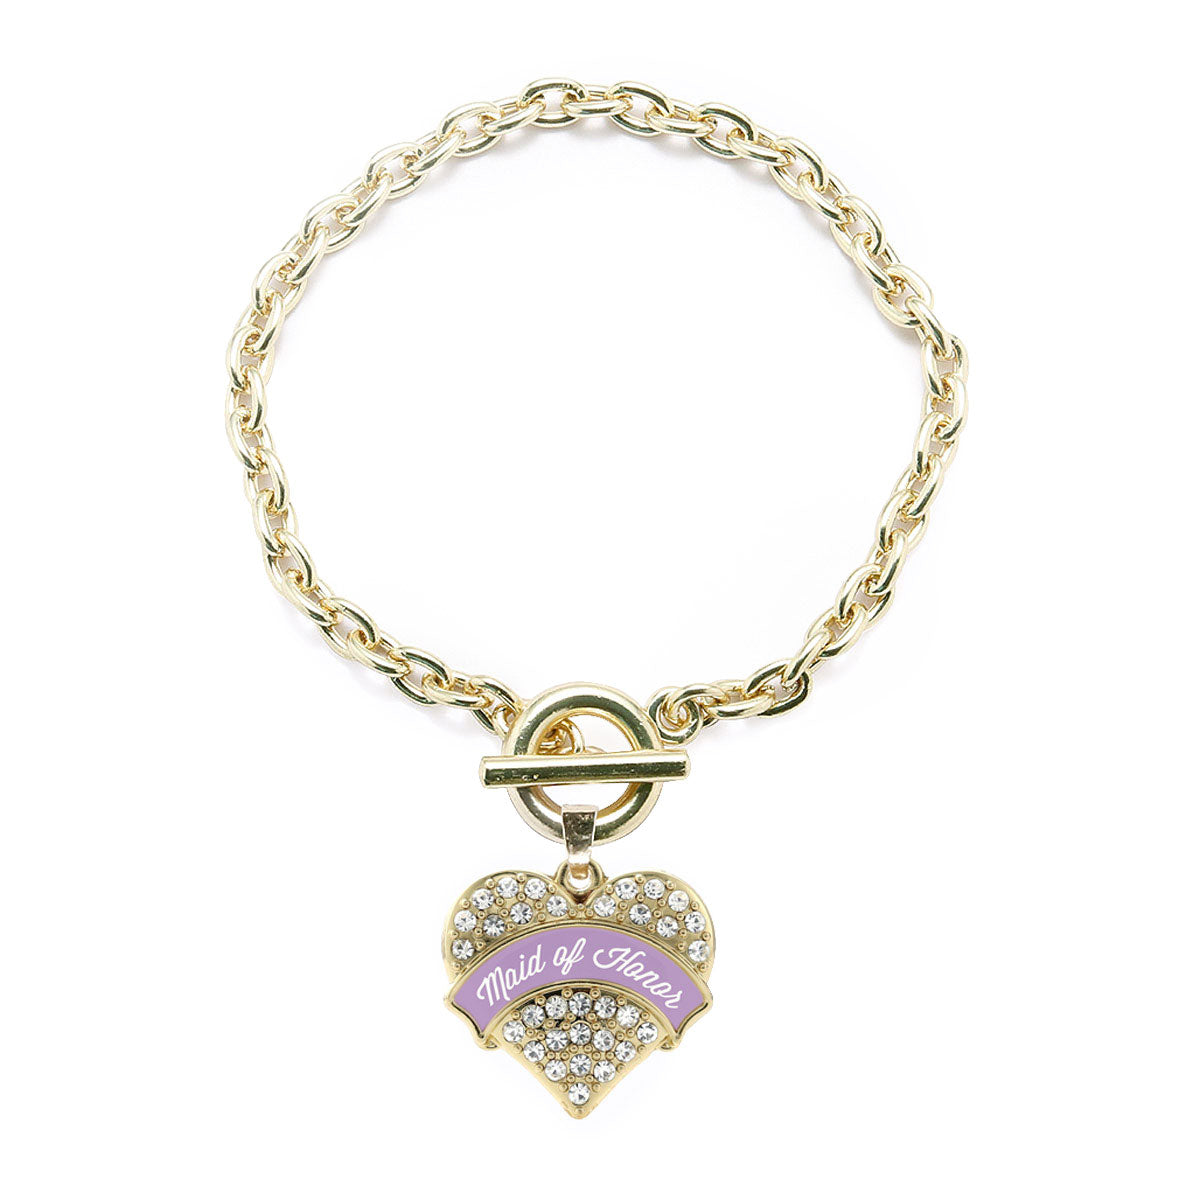 Gold Lavender Maid of Honor Pave Heart Charm Toggle Bracelet